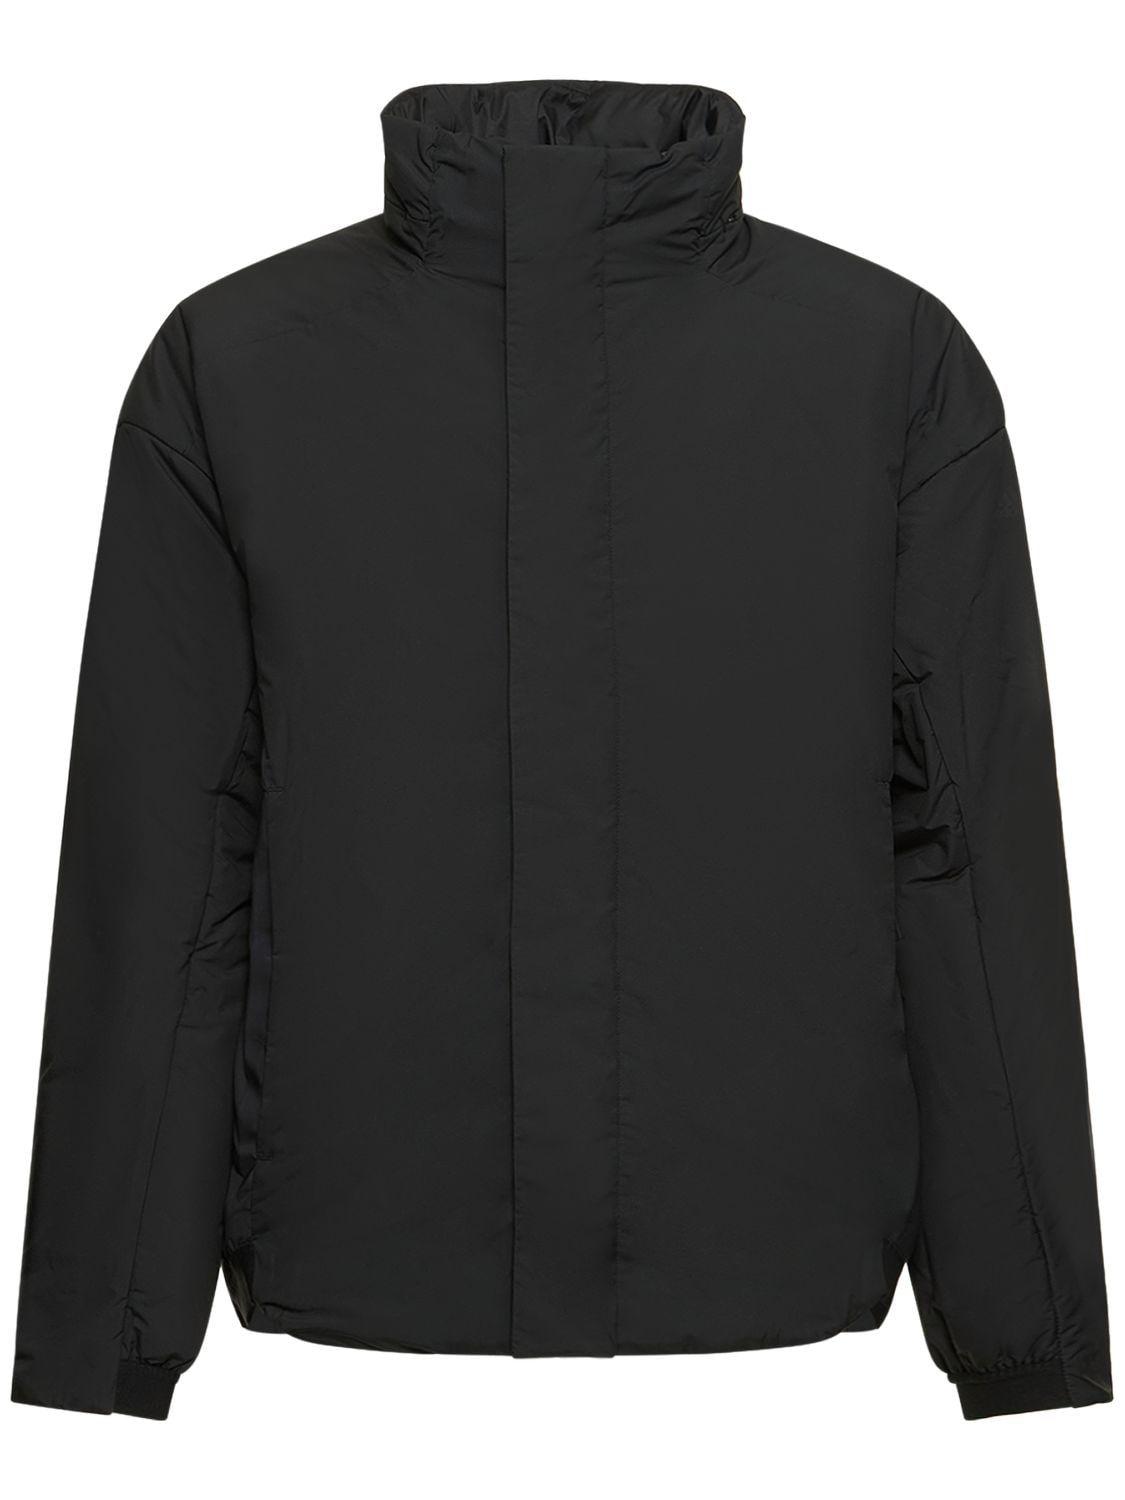 adidas Originals My Shelter Insulated Jacket in Black for Men | Lyst